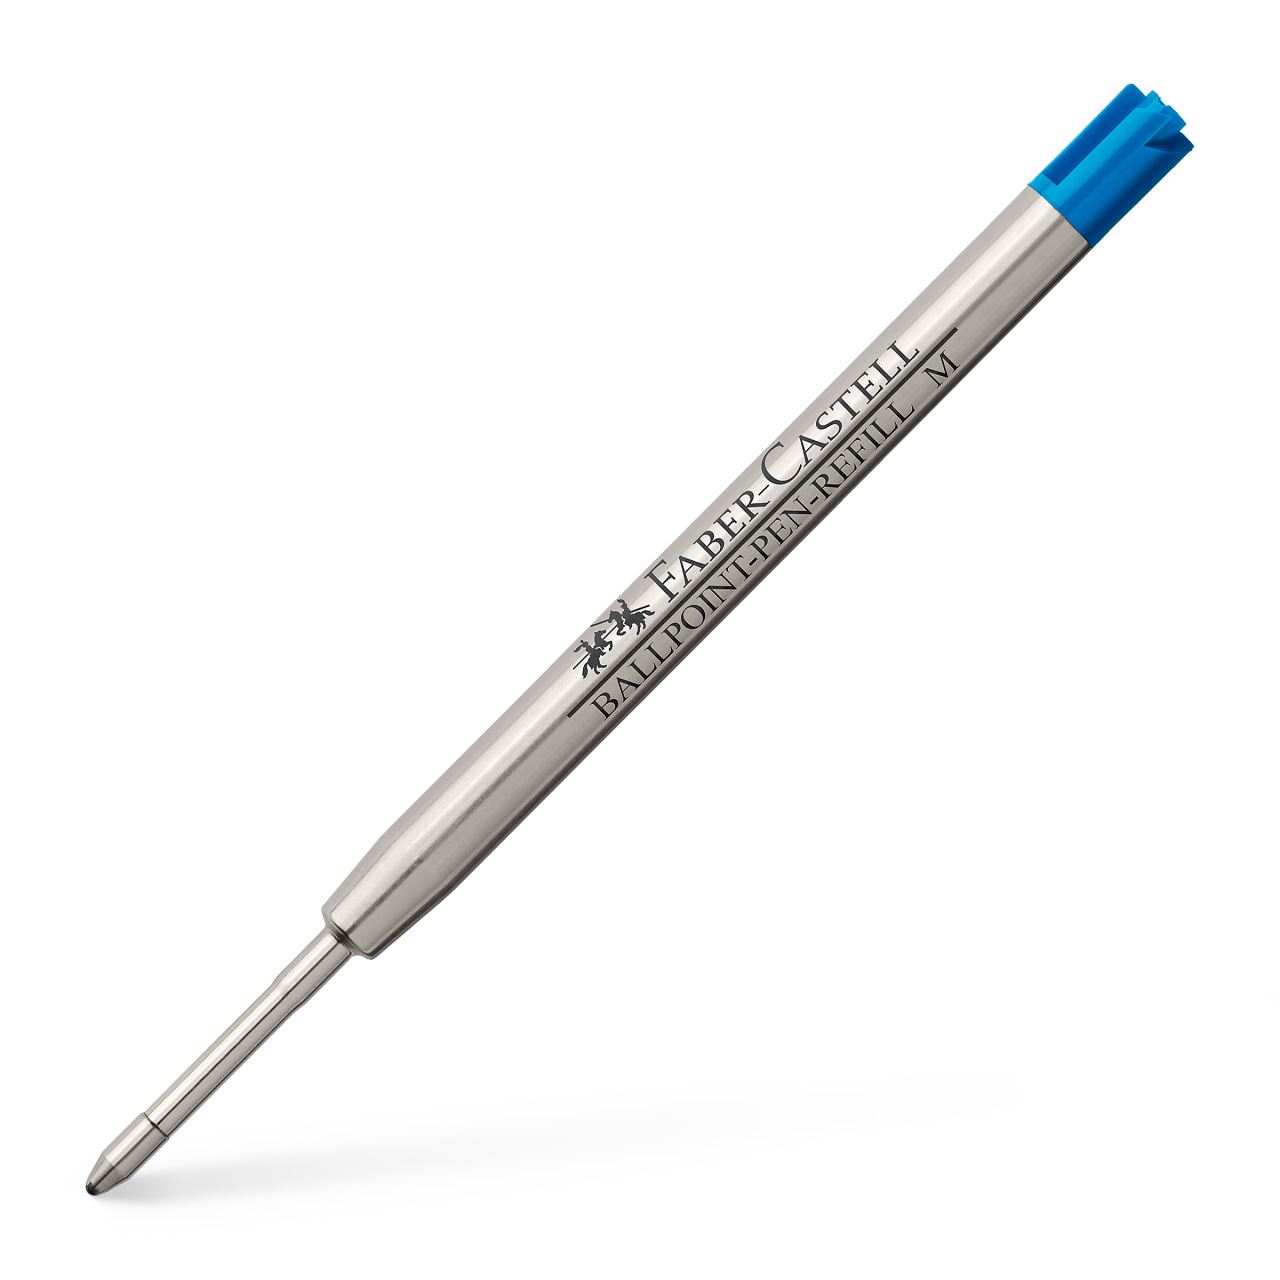 Faber-Castell - Spare refill ballpoint pen, large-capacity refill M, blue